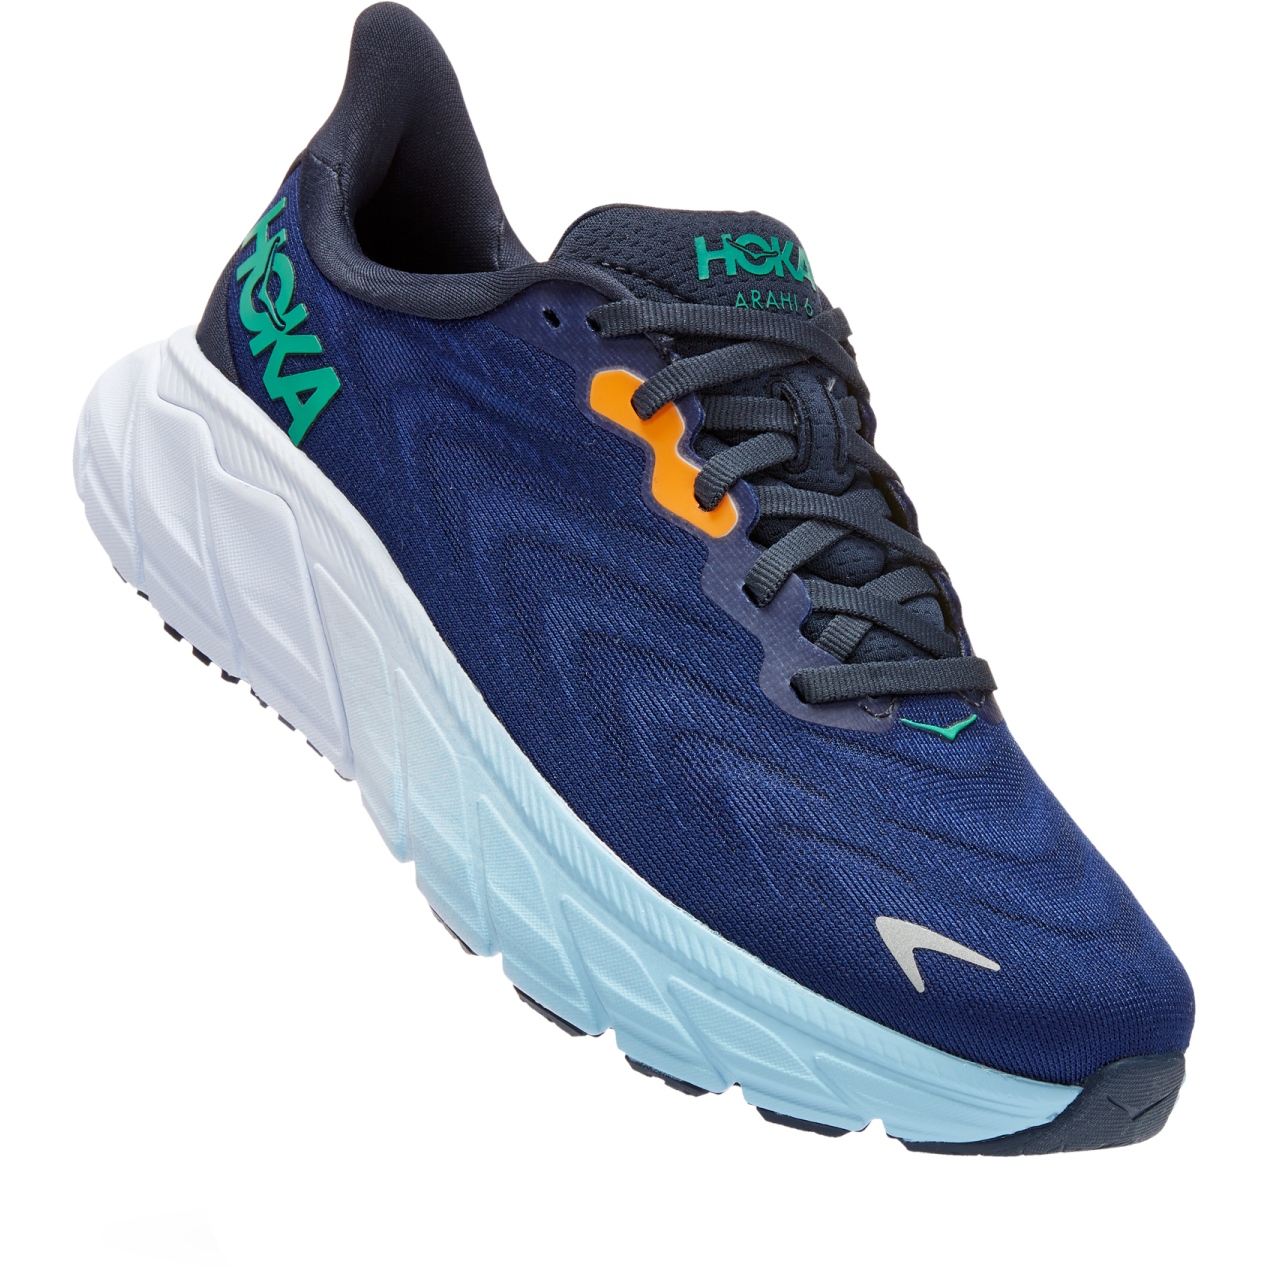 Image of Hoka Arahi 6 Women's Running Shoes - outer space / bellwether blue